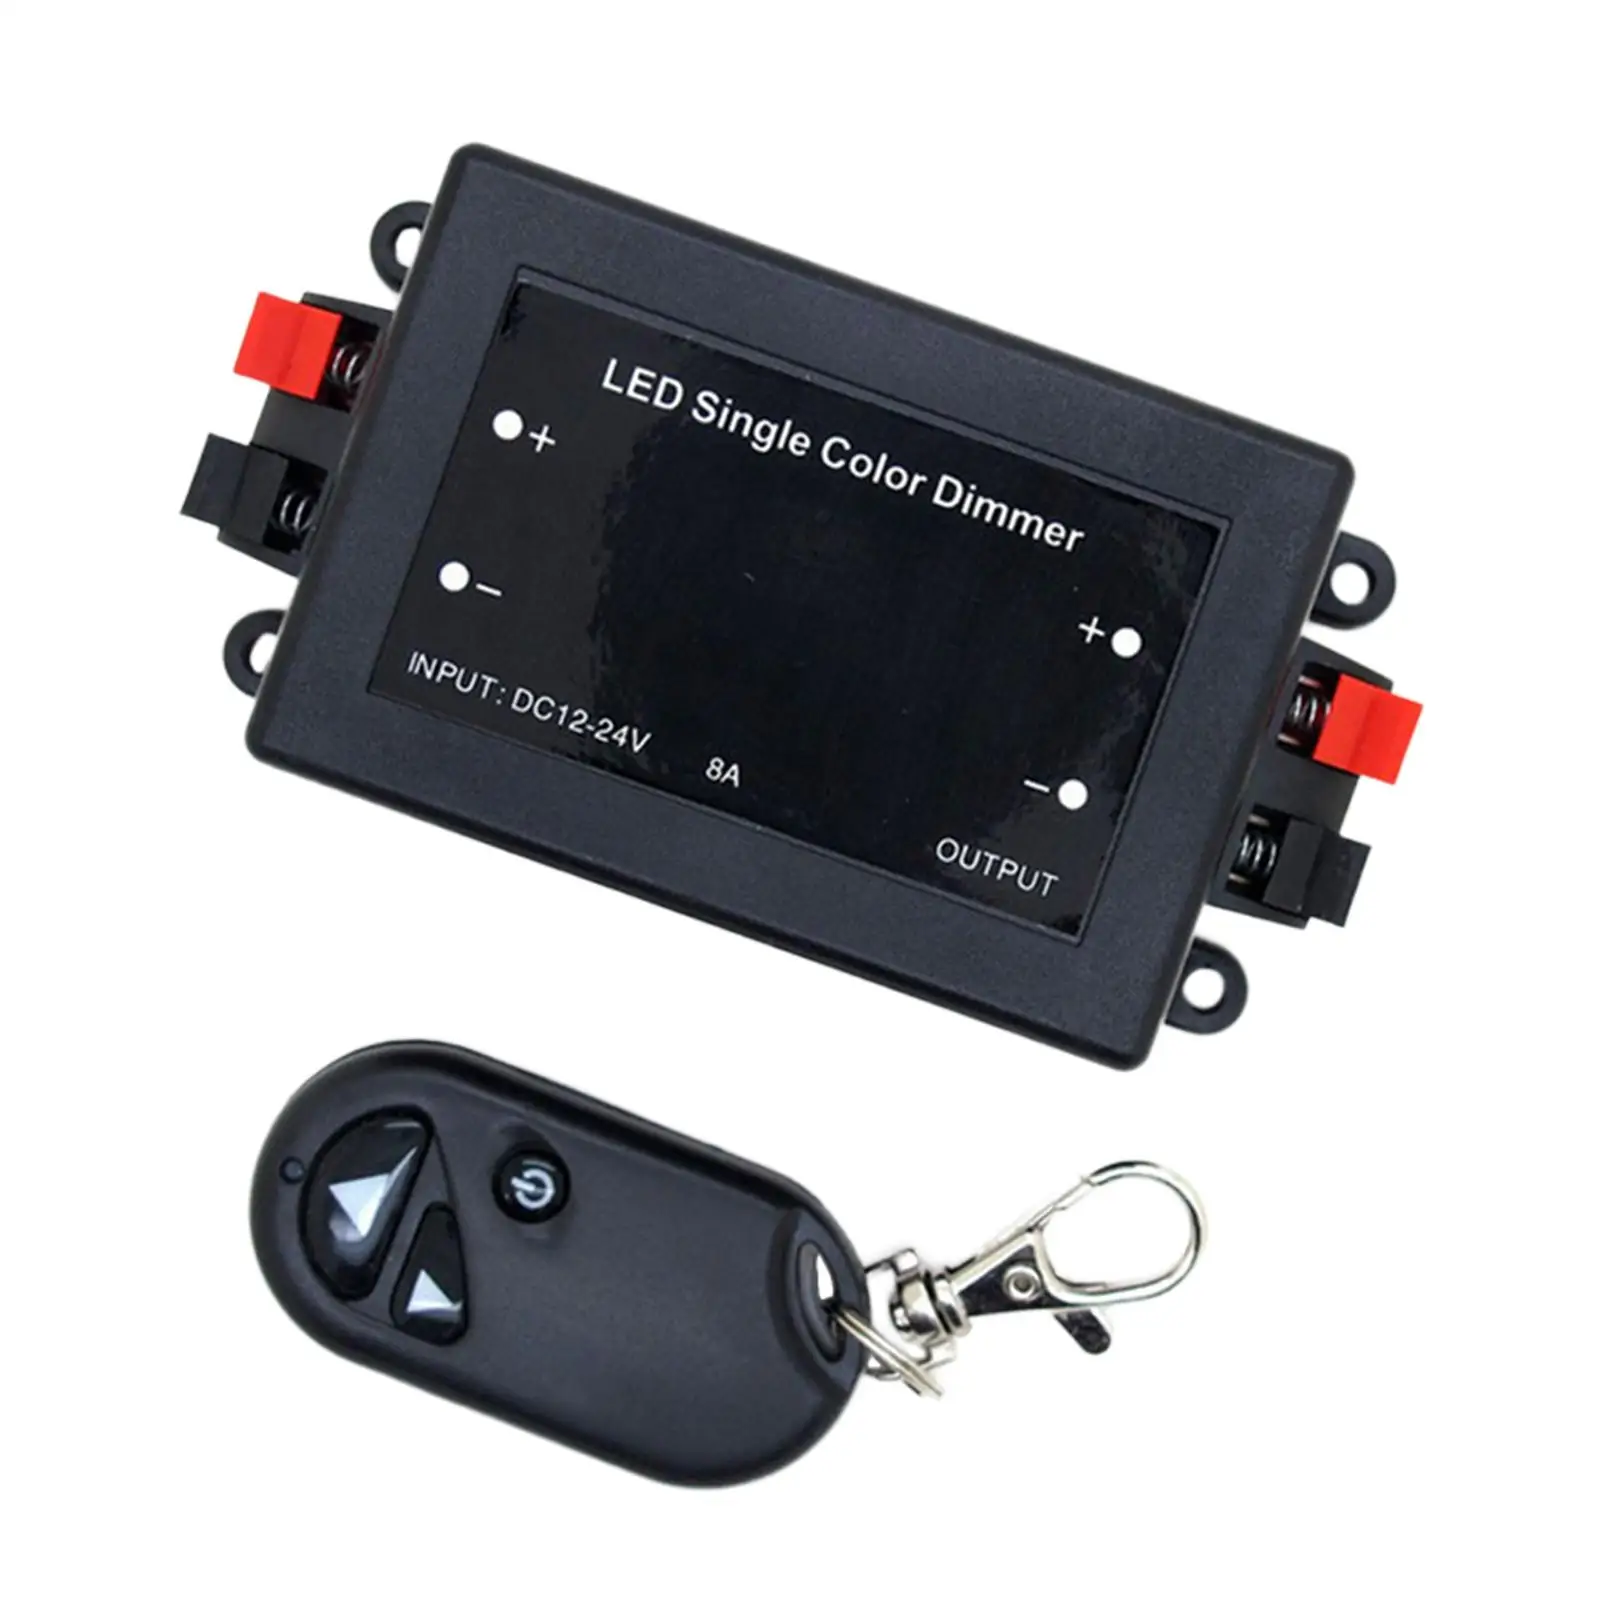 

LED Single Color Dimmer Cotroller Universal On/Off Strobe Flash 3 Key Remote 8A Remote Control Switch for Car Truck Vehicle